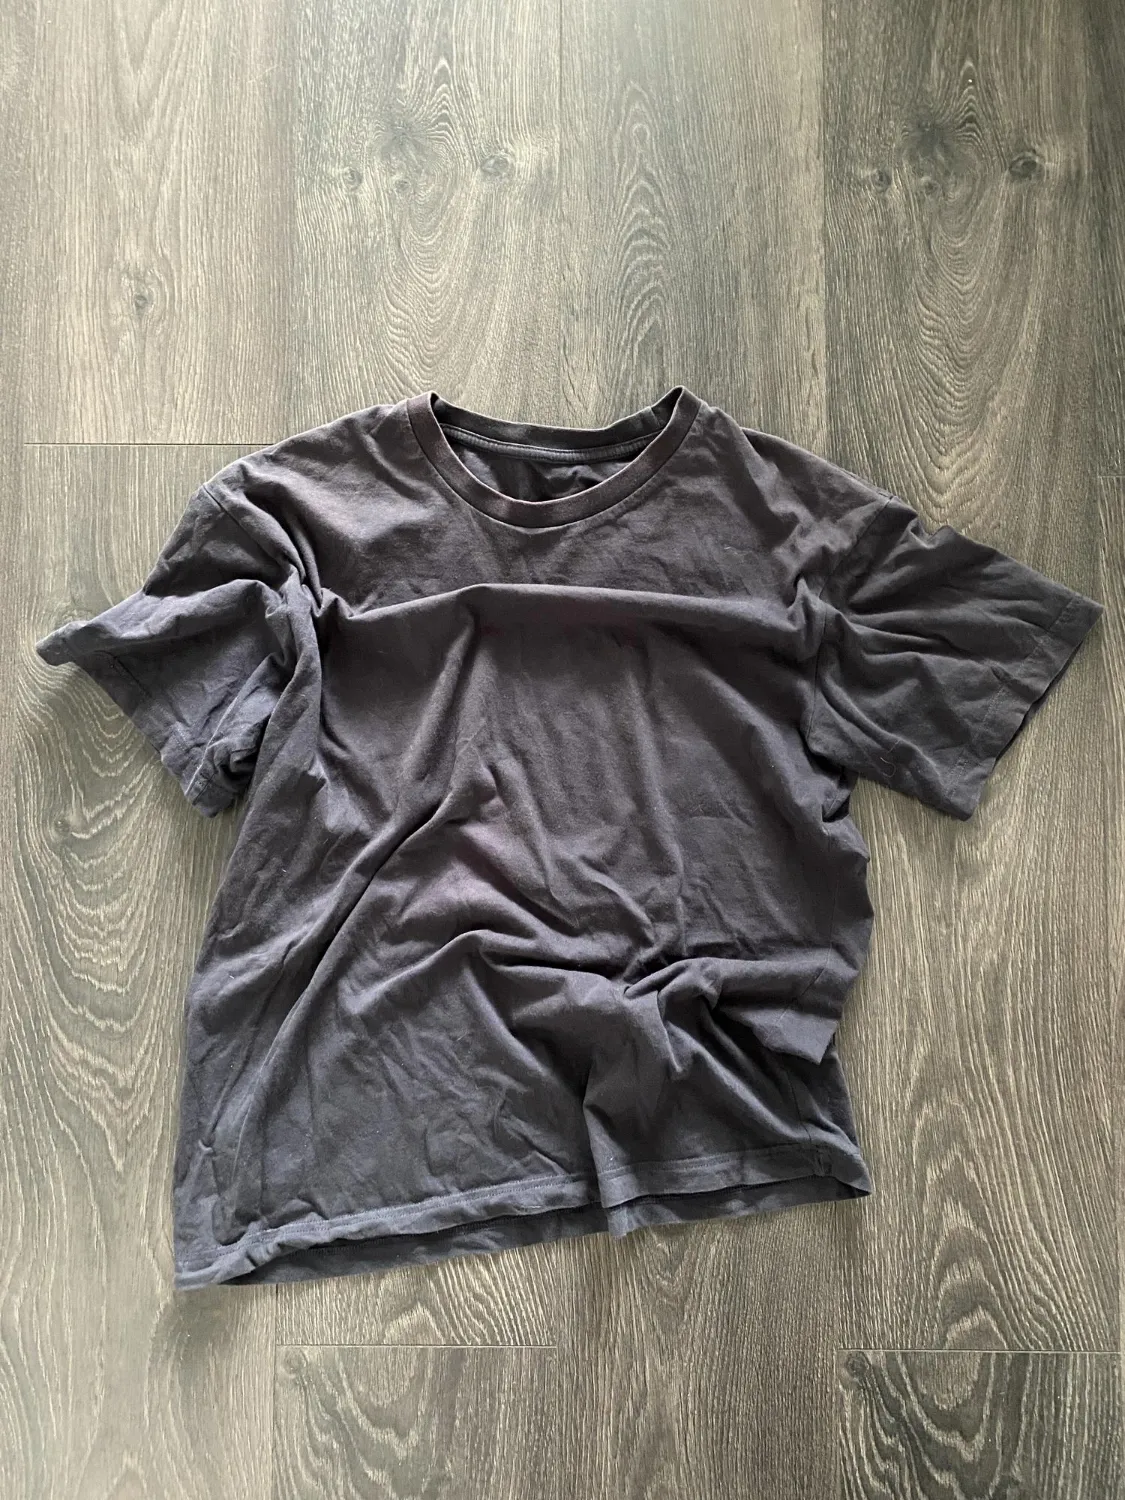 Black tshirt without a pattern for a logo lying on a black background crumpled